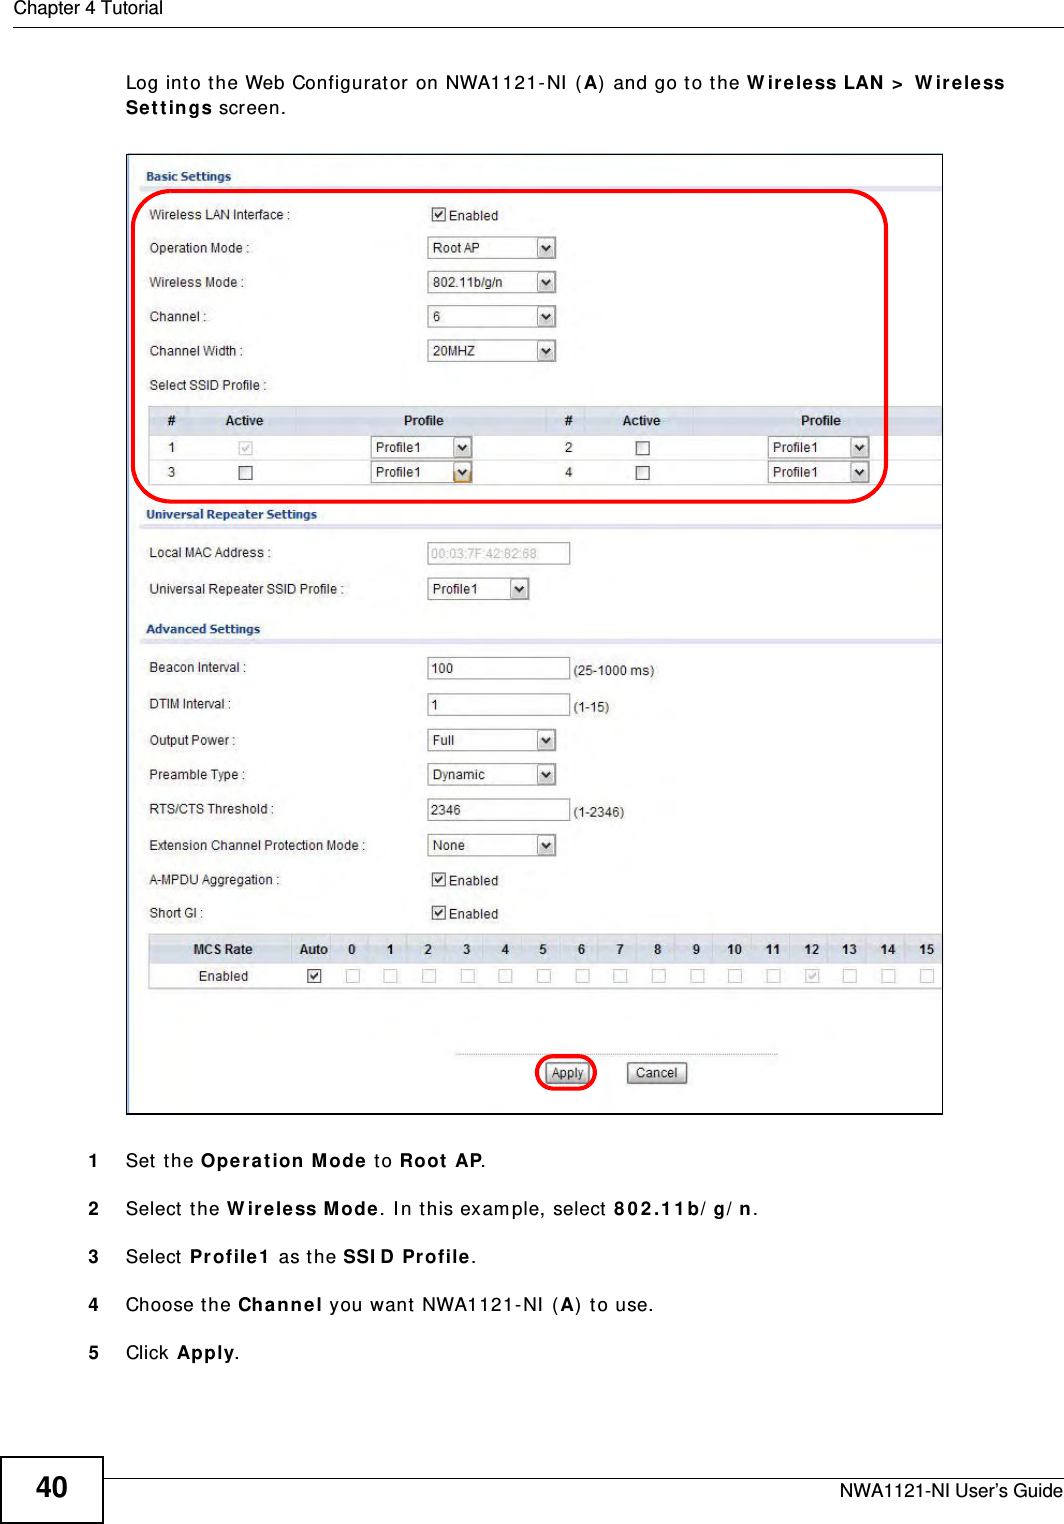 Chapter 4 TutorialNWA1121-NI User’s Guide40Log into the Web Configurator on NWA1121-NI (A) and go to the Wireless LAN &gt; Wireless Settings screen.1Set the Operation Mode to Root AP.2Select the Wireless Mode. In this example, select 802.11b/g/n. 3Select Profile1 as the SSID Profile. 4Choose the Channel you want NWA1121-NI (A) to use.5Click Apply. 